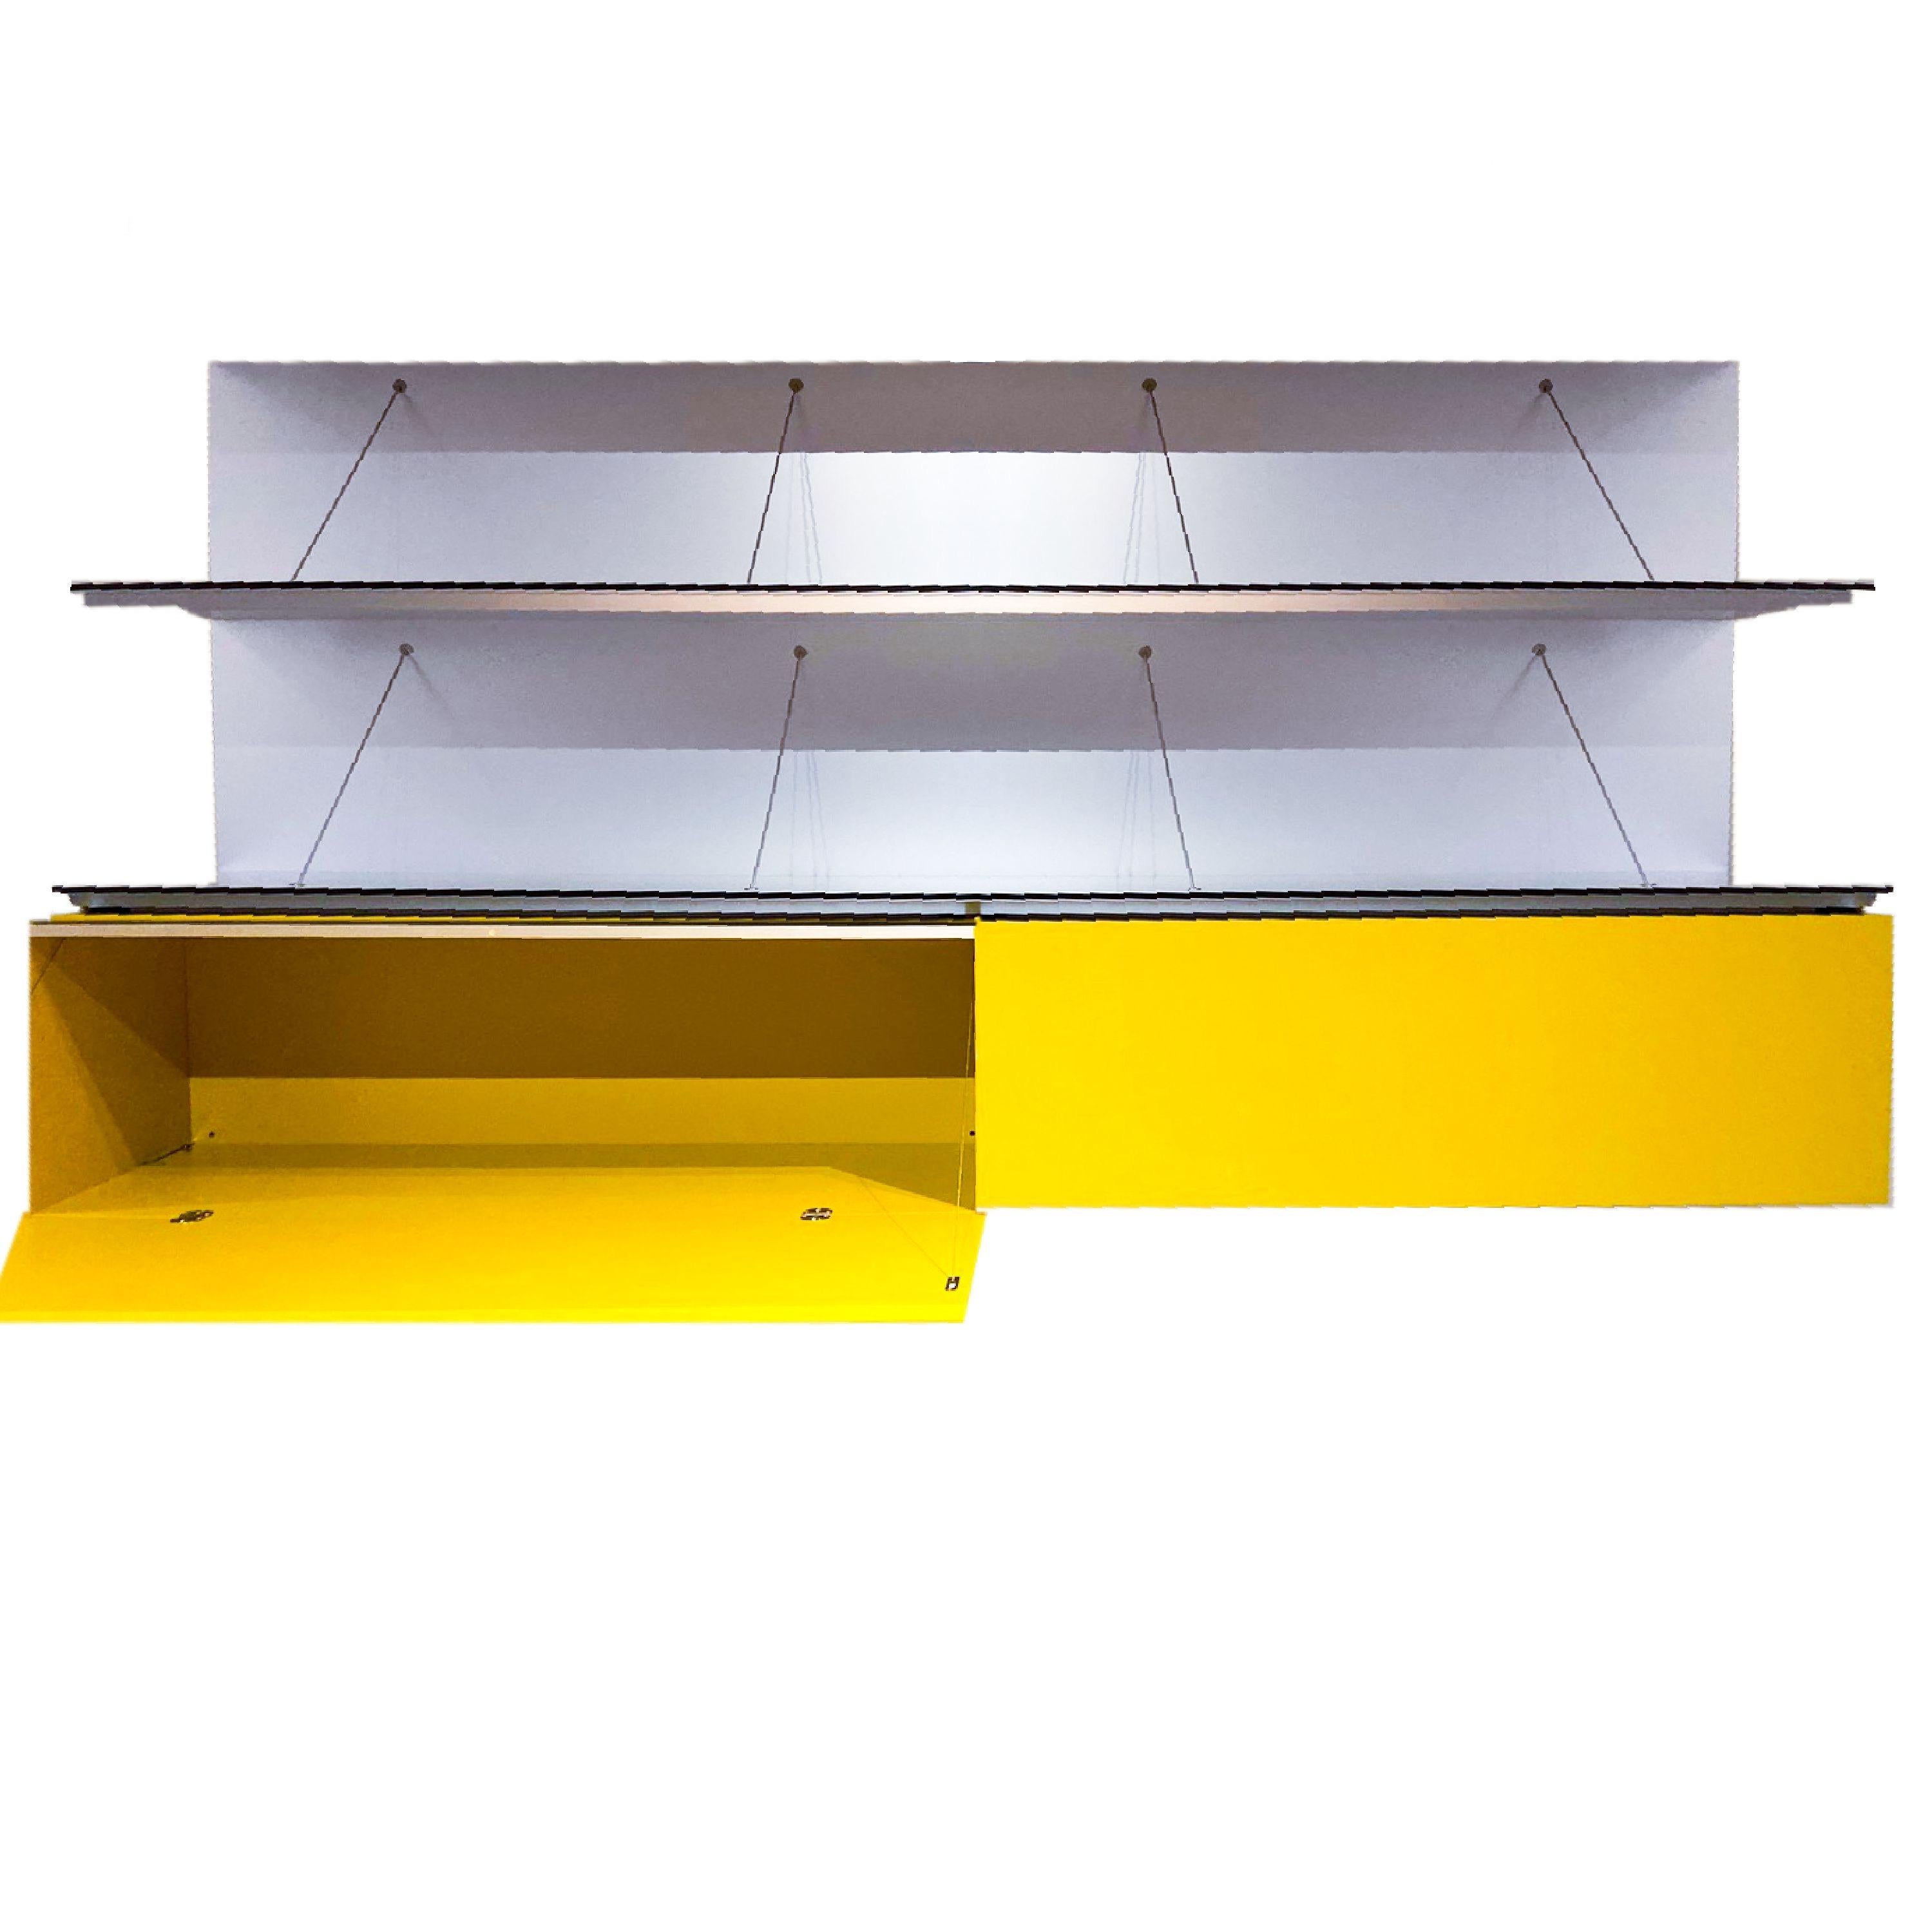 Pab Wallsystem by Studio Kairos for B&B Italia in custom citron lacquer shelves & cabinet

It is the result of a very simple idea: a sheet folded in half and restrained by light ties, designed to be used as a bookshelf and top. In time, Pab has